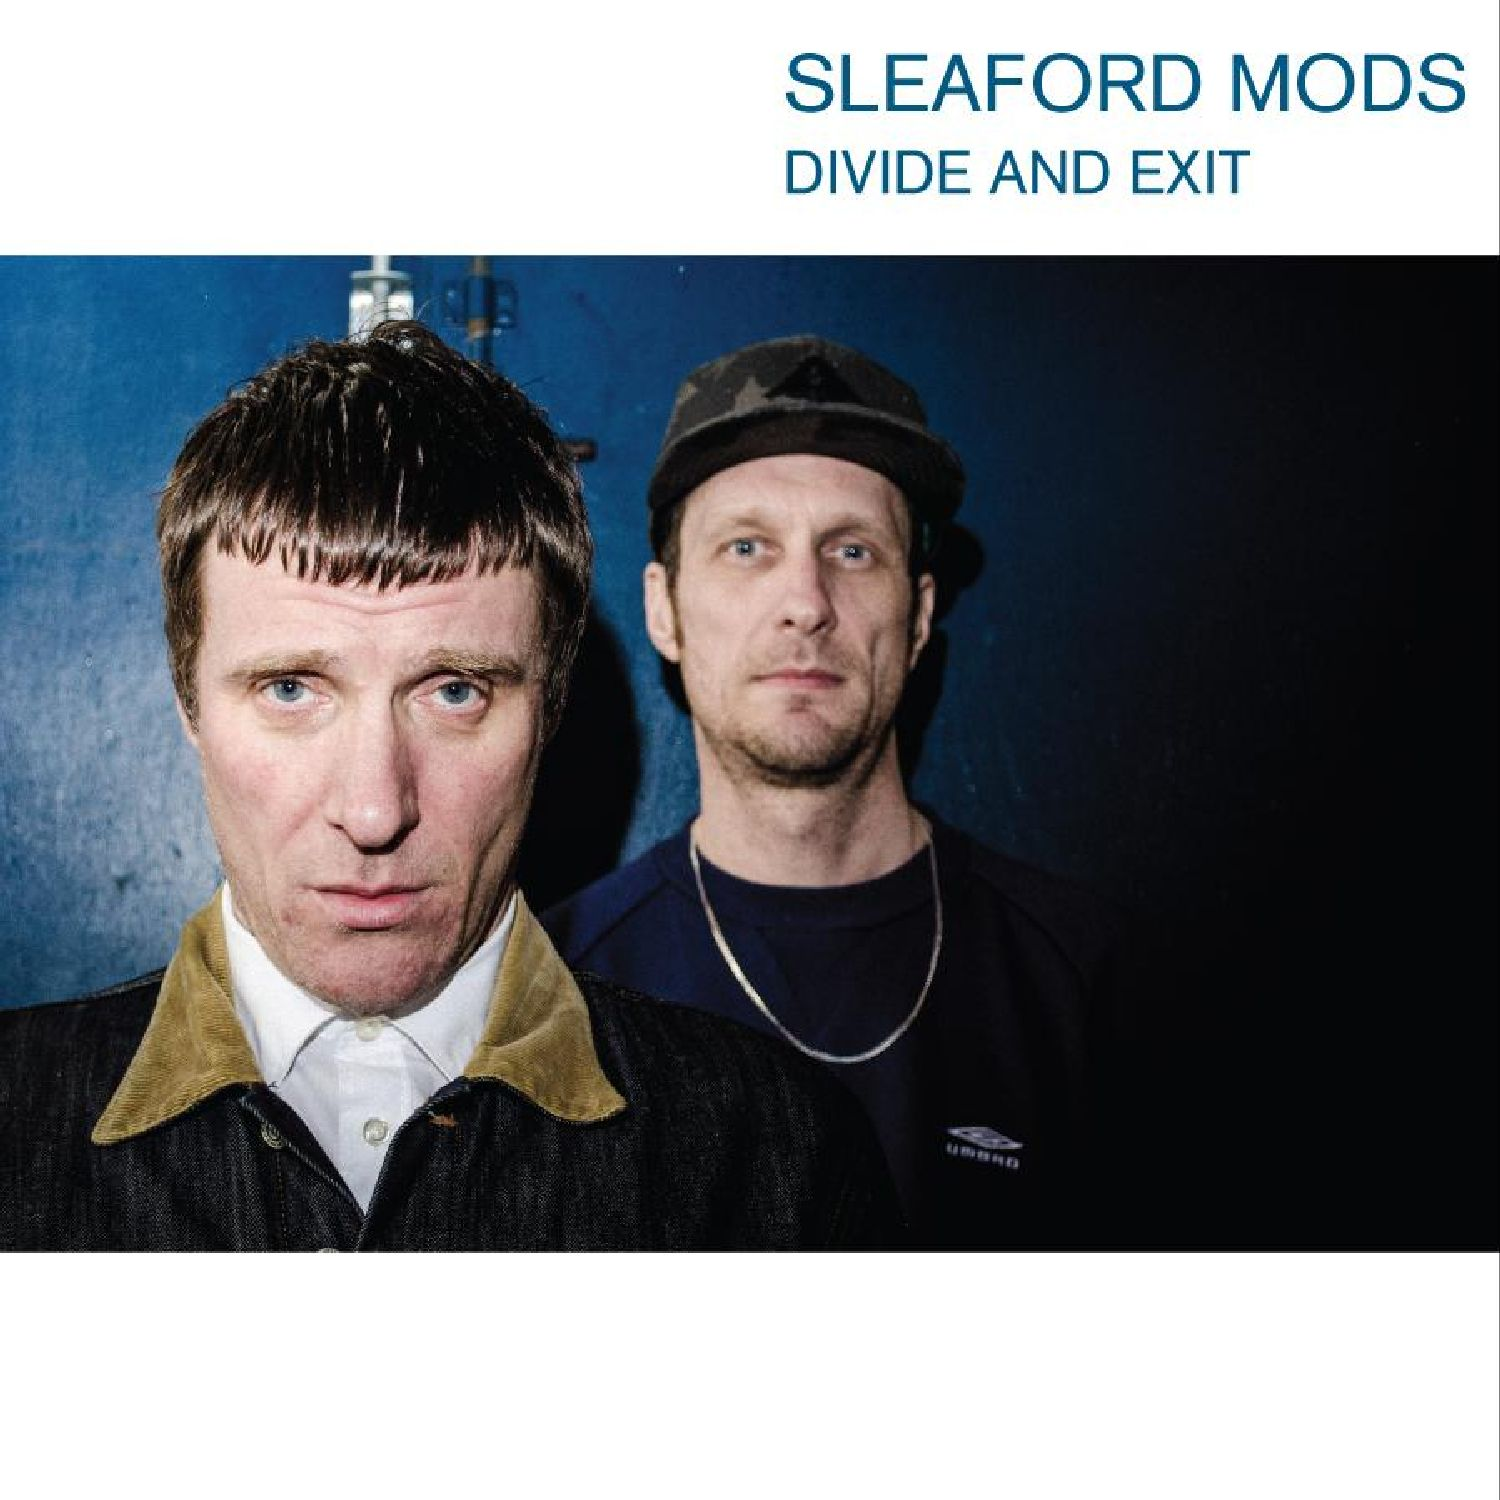 Sleaford Mods - Divide and Exit (10th Anniversary Edition): CD